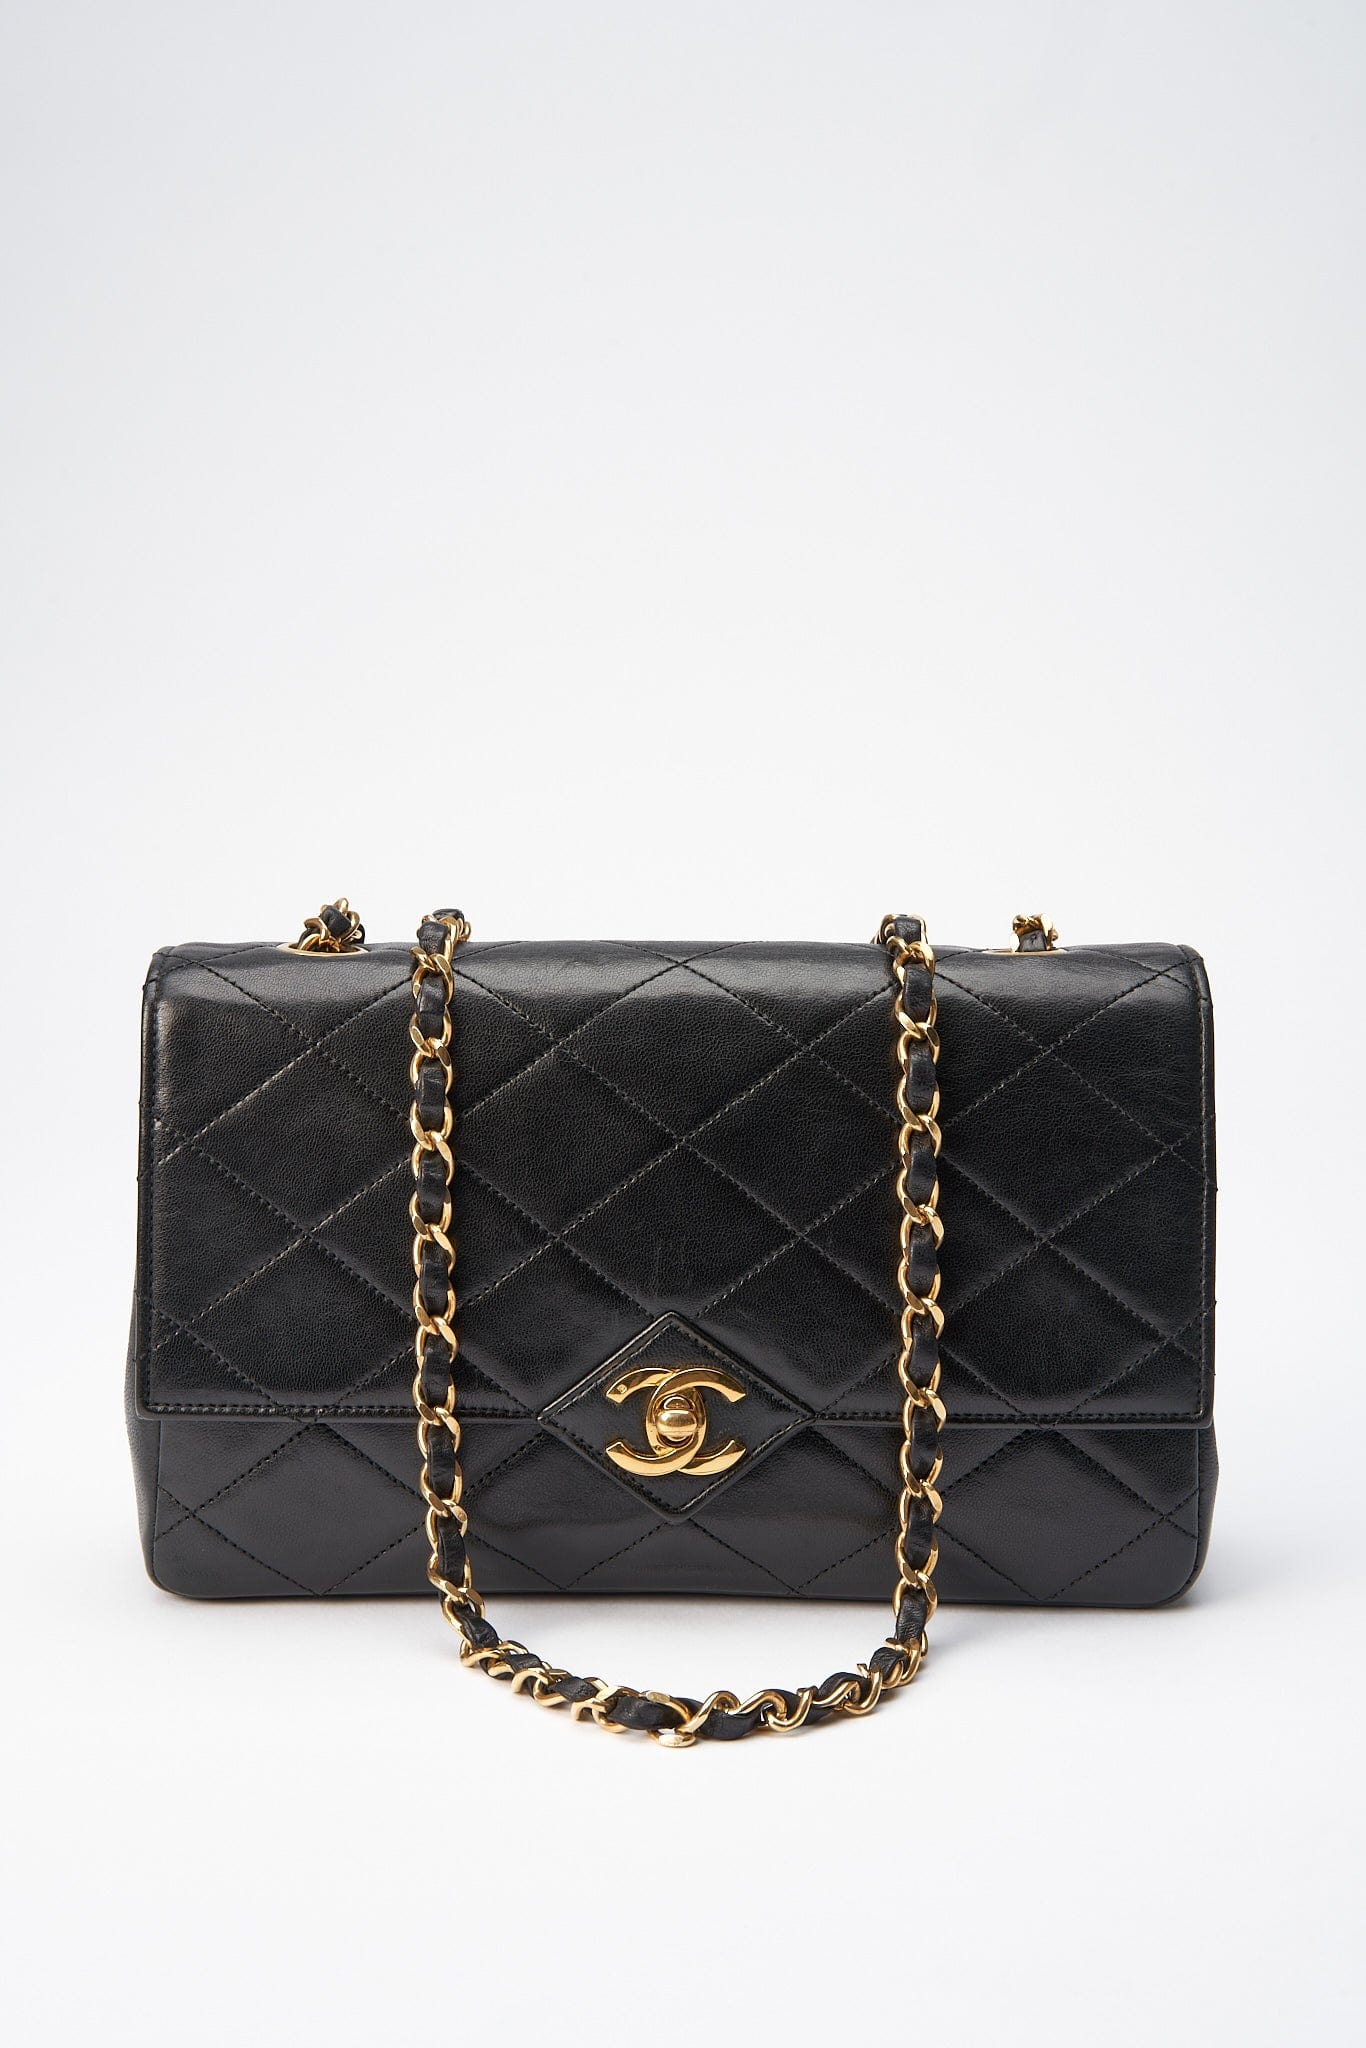 Chanel Vintage Quilted Diana Flap Bag Black Caviar 24K gold Plated